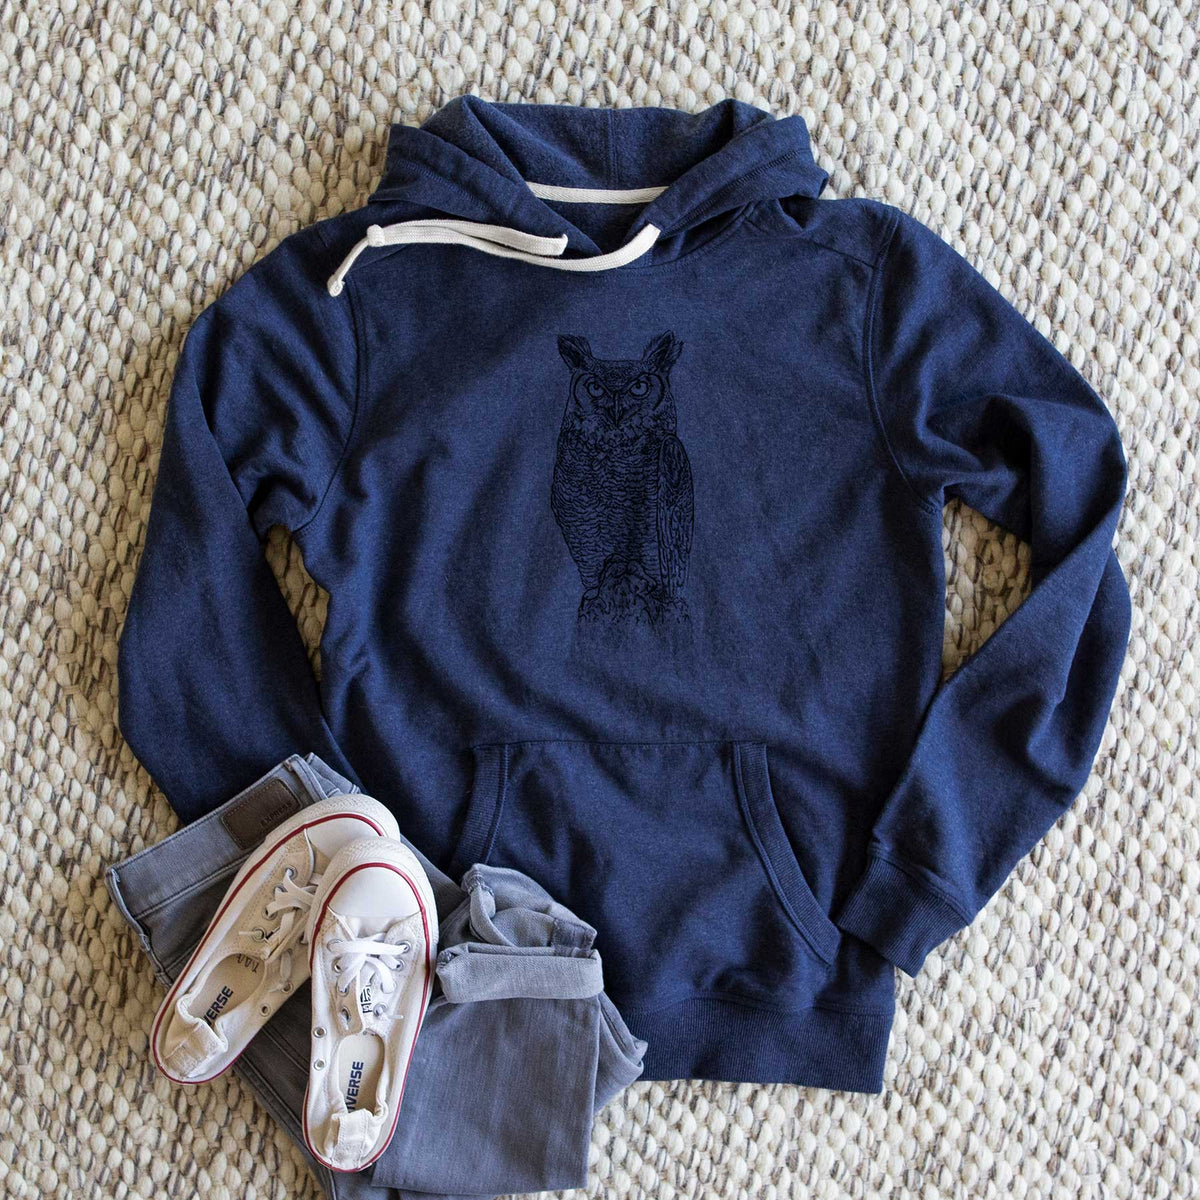 Bubo virginianus - Great Horned Owl - Unisex Recycled Hoodie - CLOSEOUT - FINAL SALE